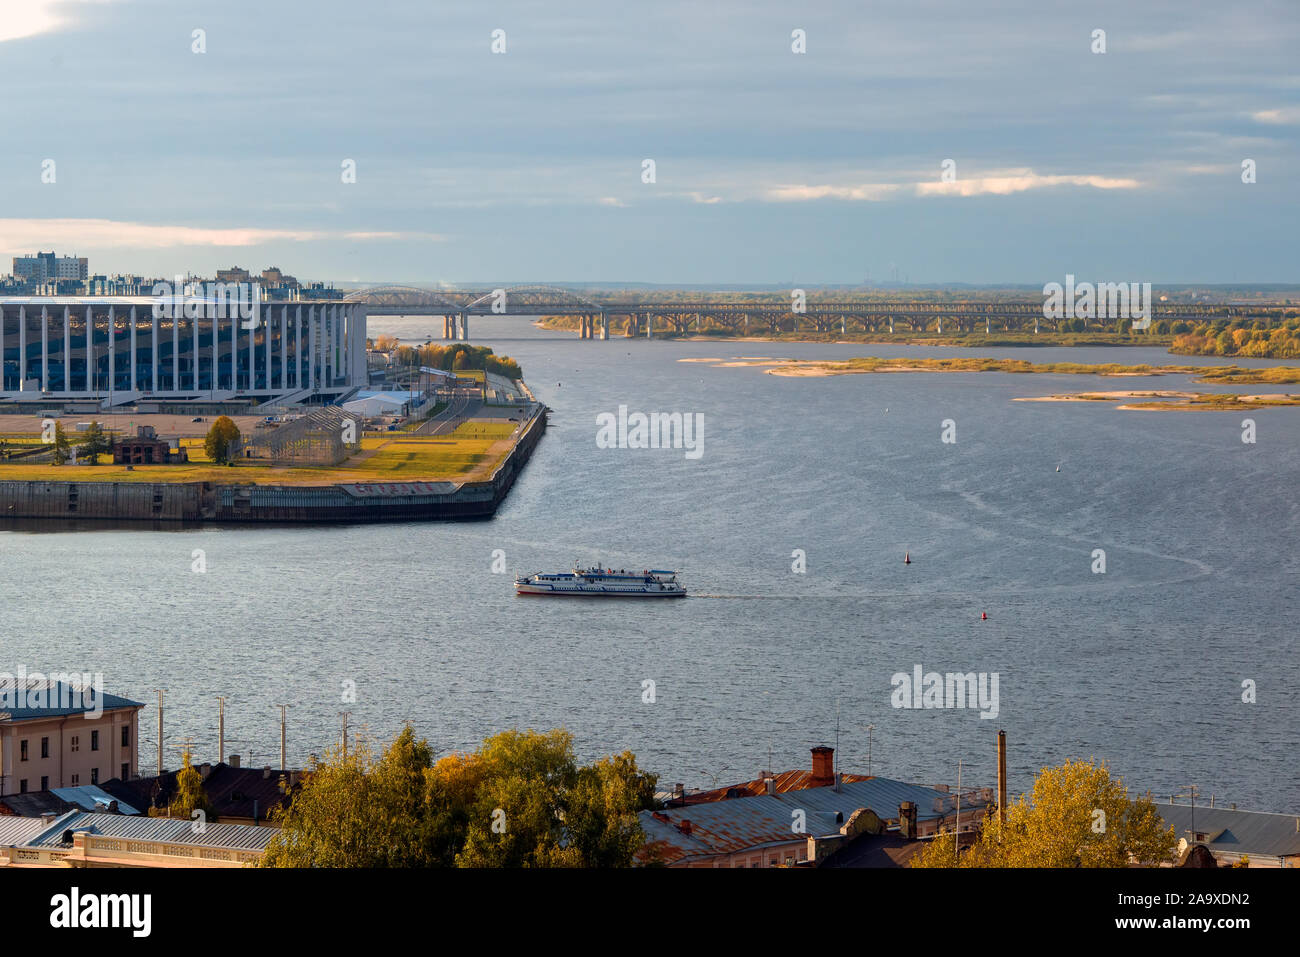 NIZHNY NOVGOROD, RUSSIA - SEPTEMBER 28, 2019: Summer view of Strelka - the confluence of the Oka and Volga rivers, the Cathedral in the name of the Ho Stock Photo